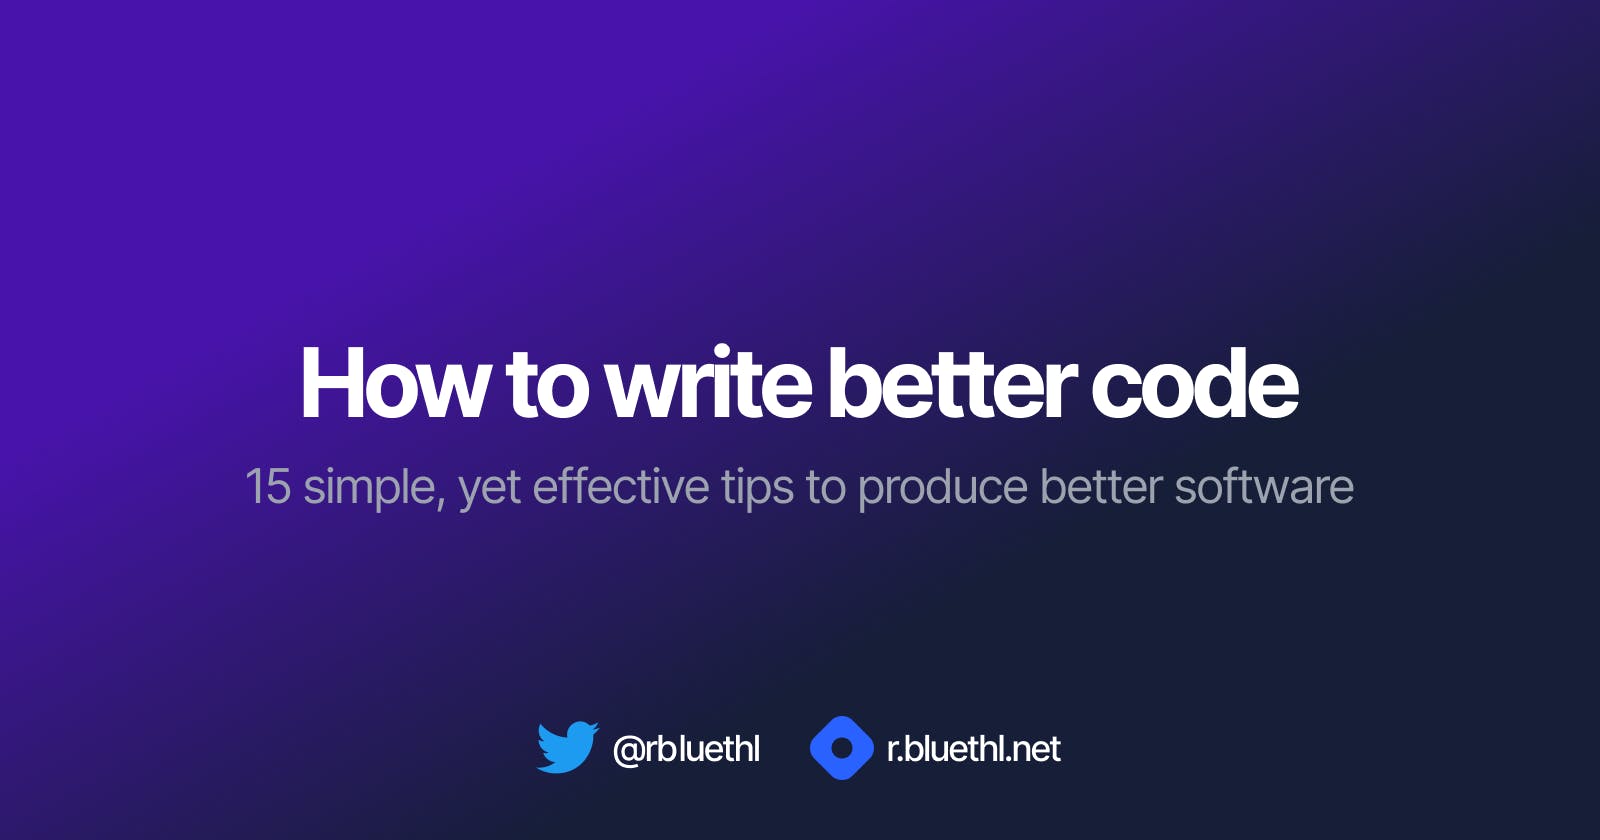 How to write better code